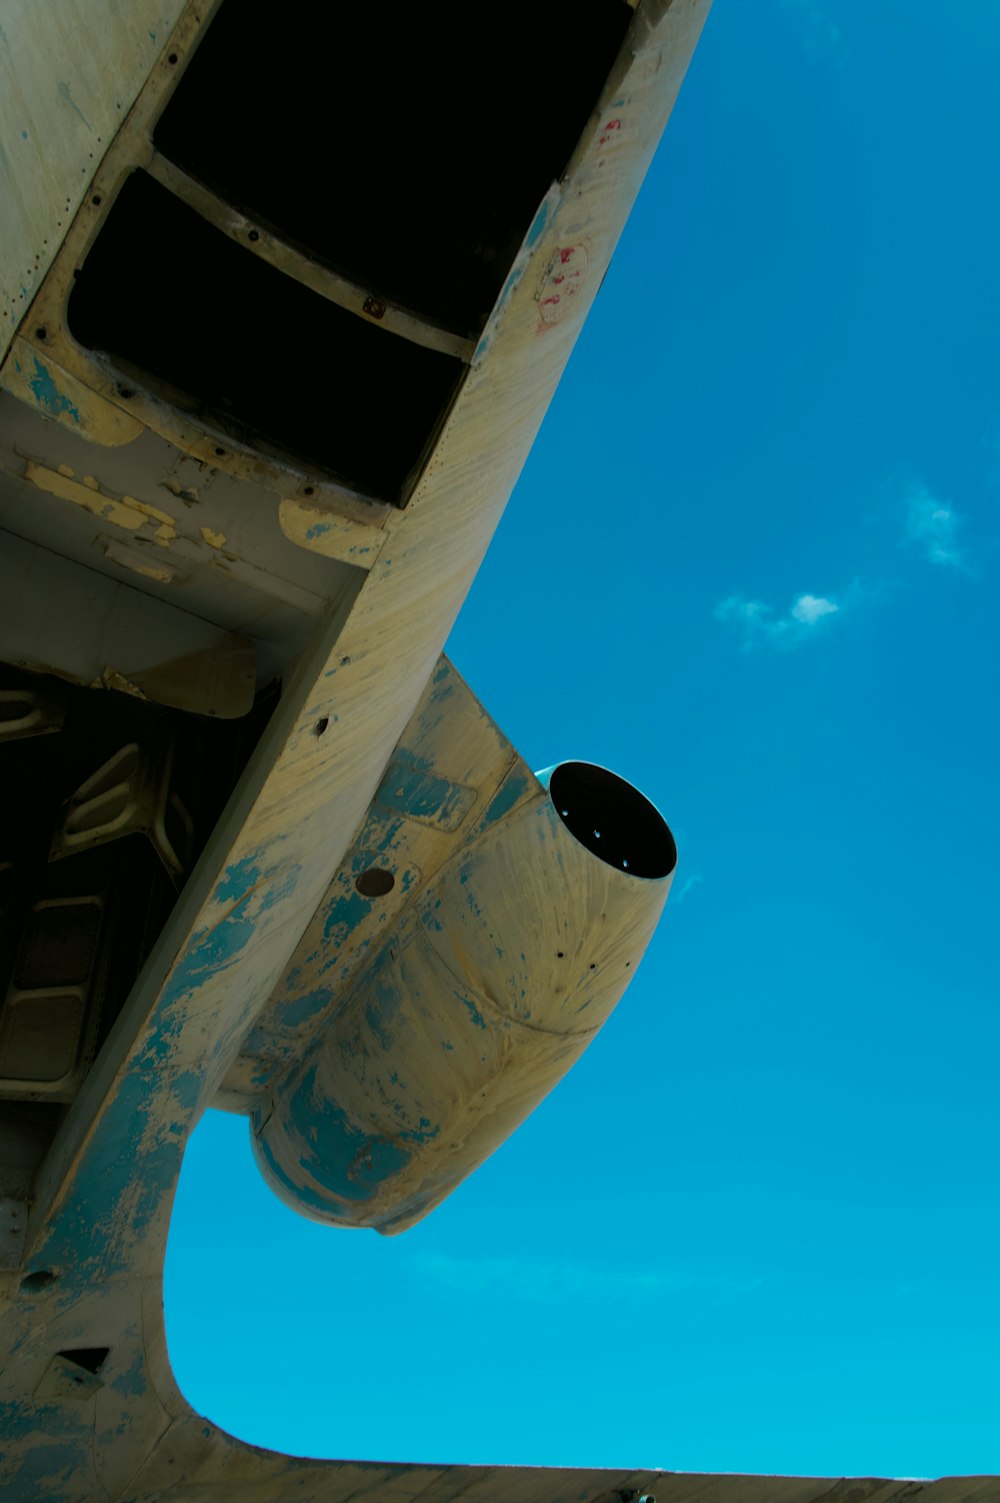 the underside of an airplane with a blue sky in the background